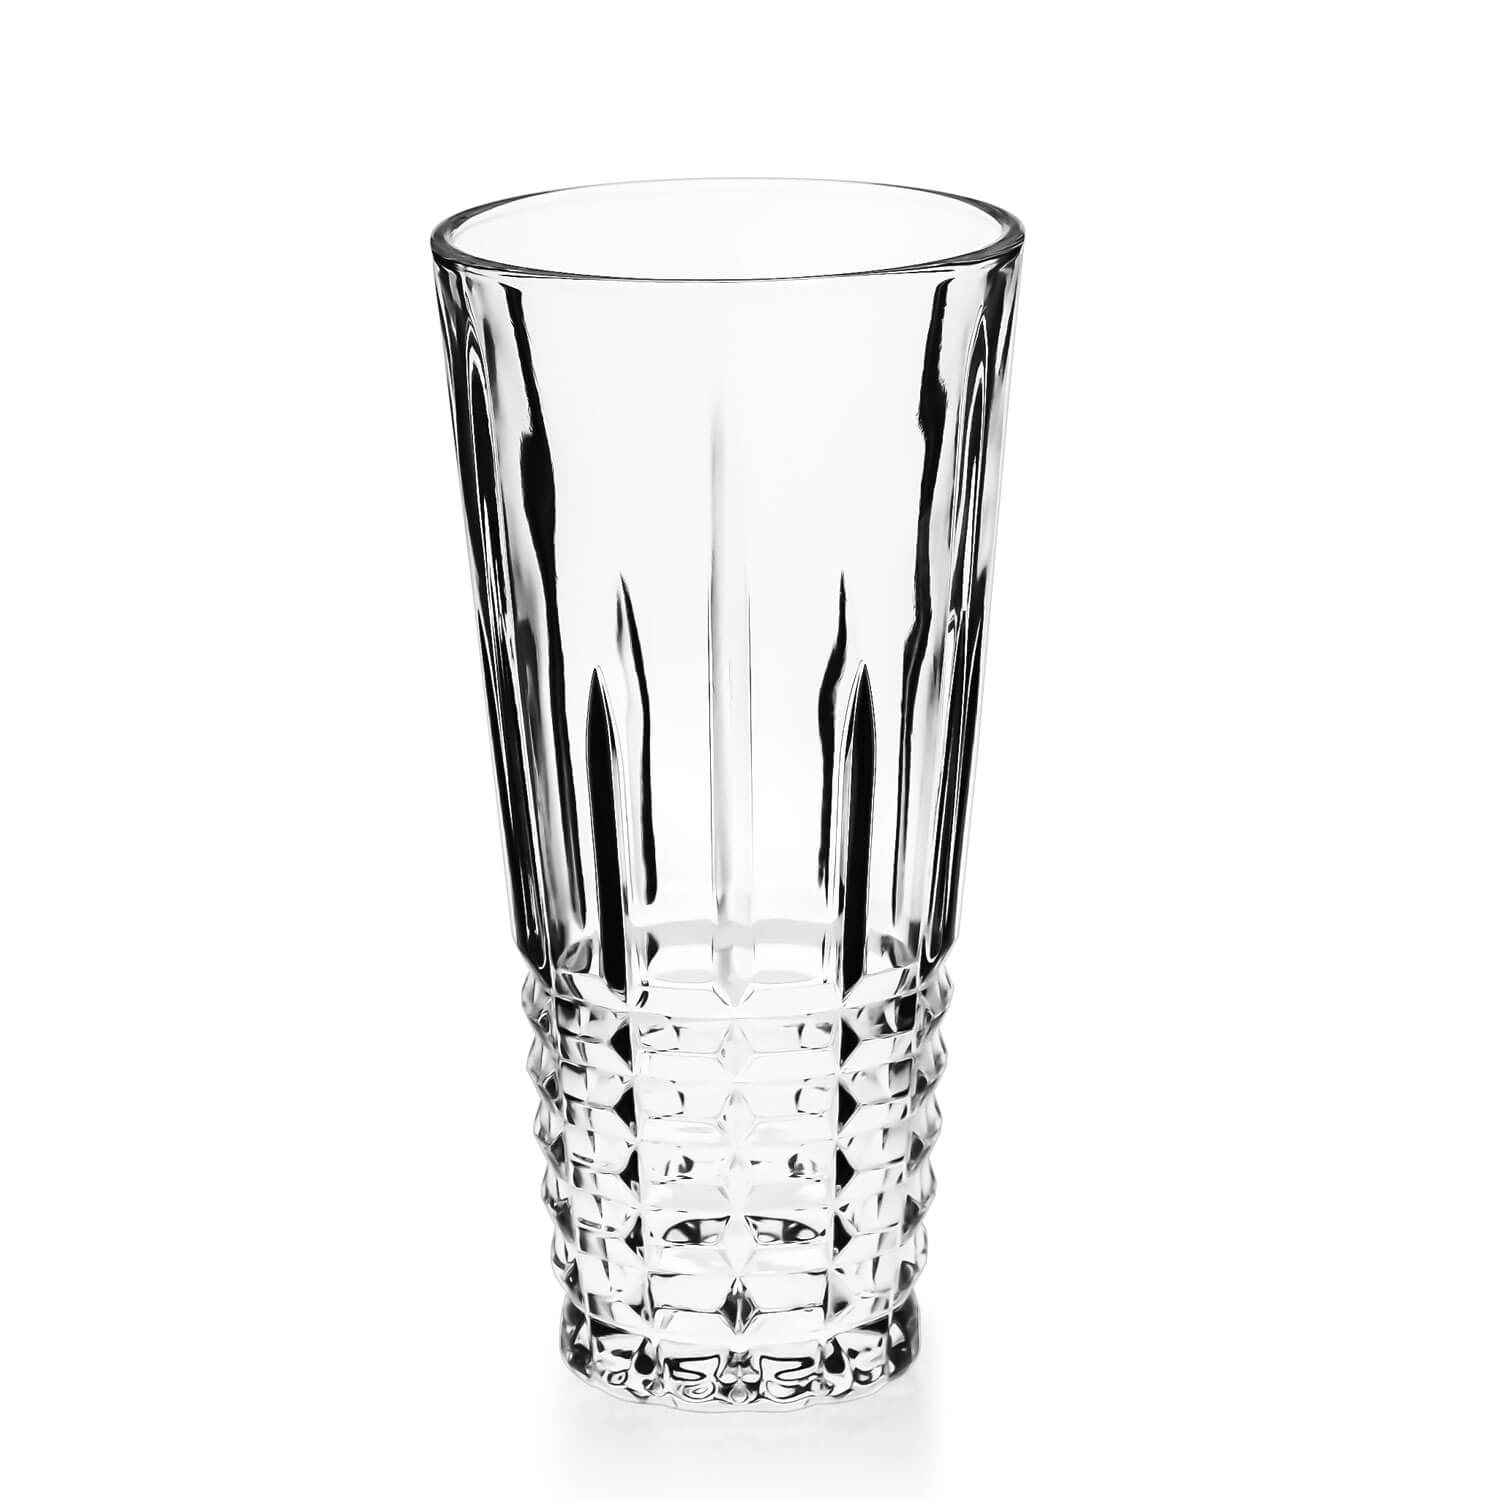 Tipperary Crystal Serenity 12 Vase 1 Shaws Department Stores